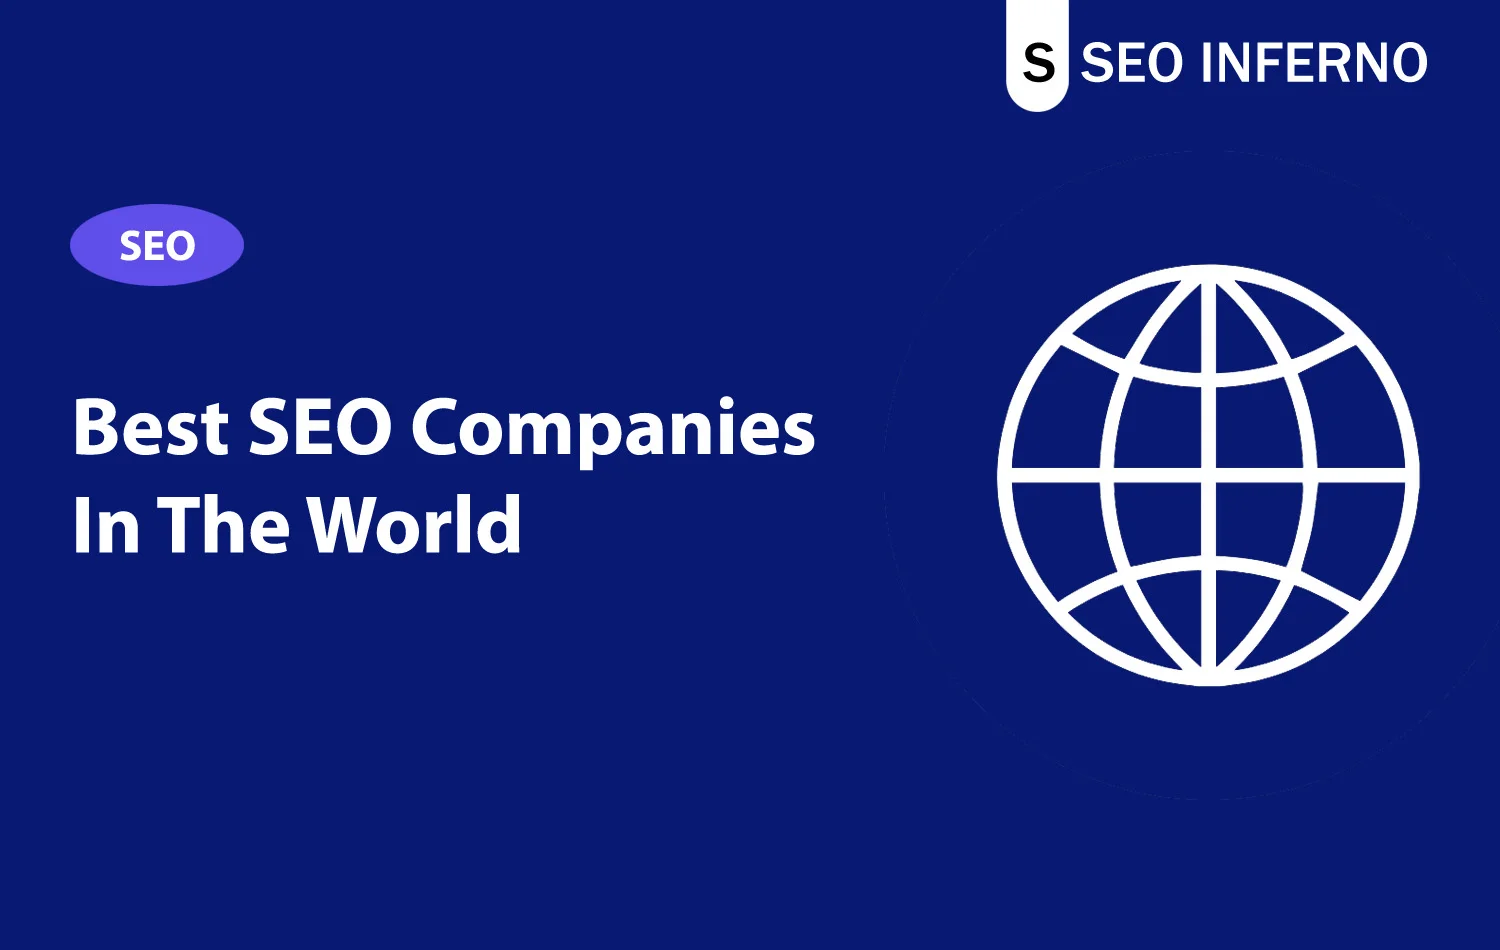 Best SEO Companies in the World